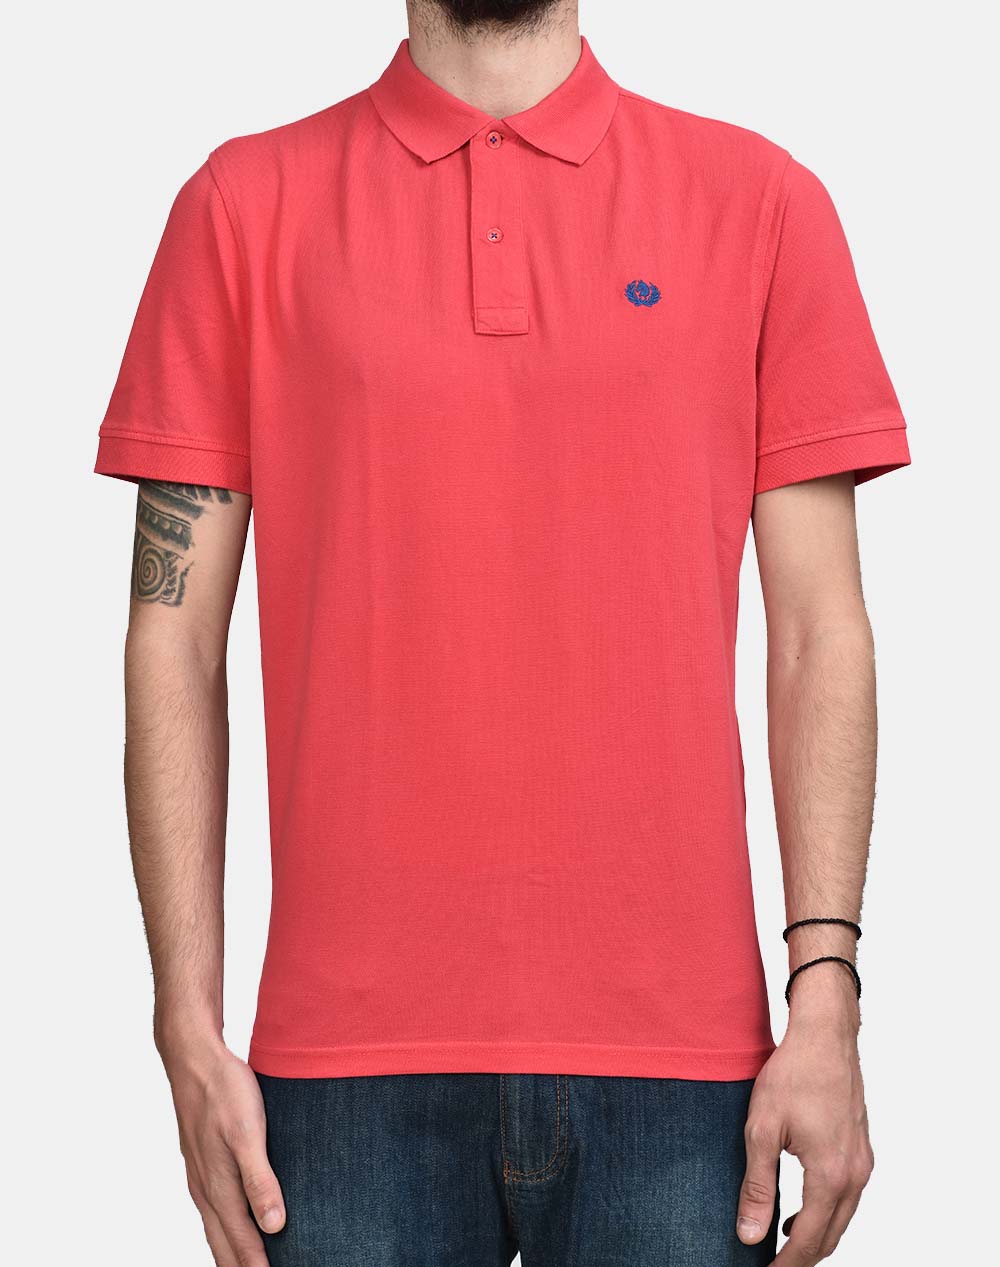 ASCOT ΜΠΛΟΥΖΑ POLO 15388350-23 Red